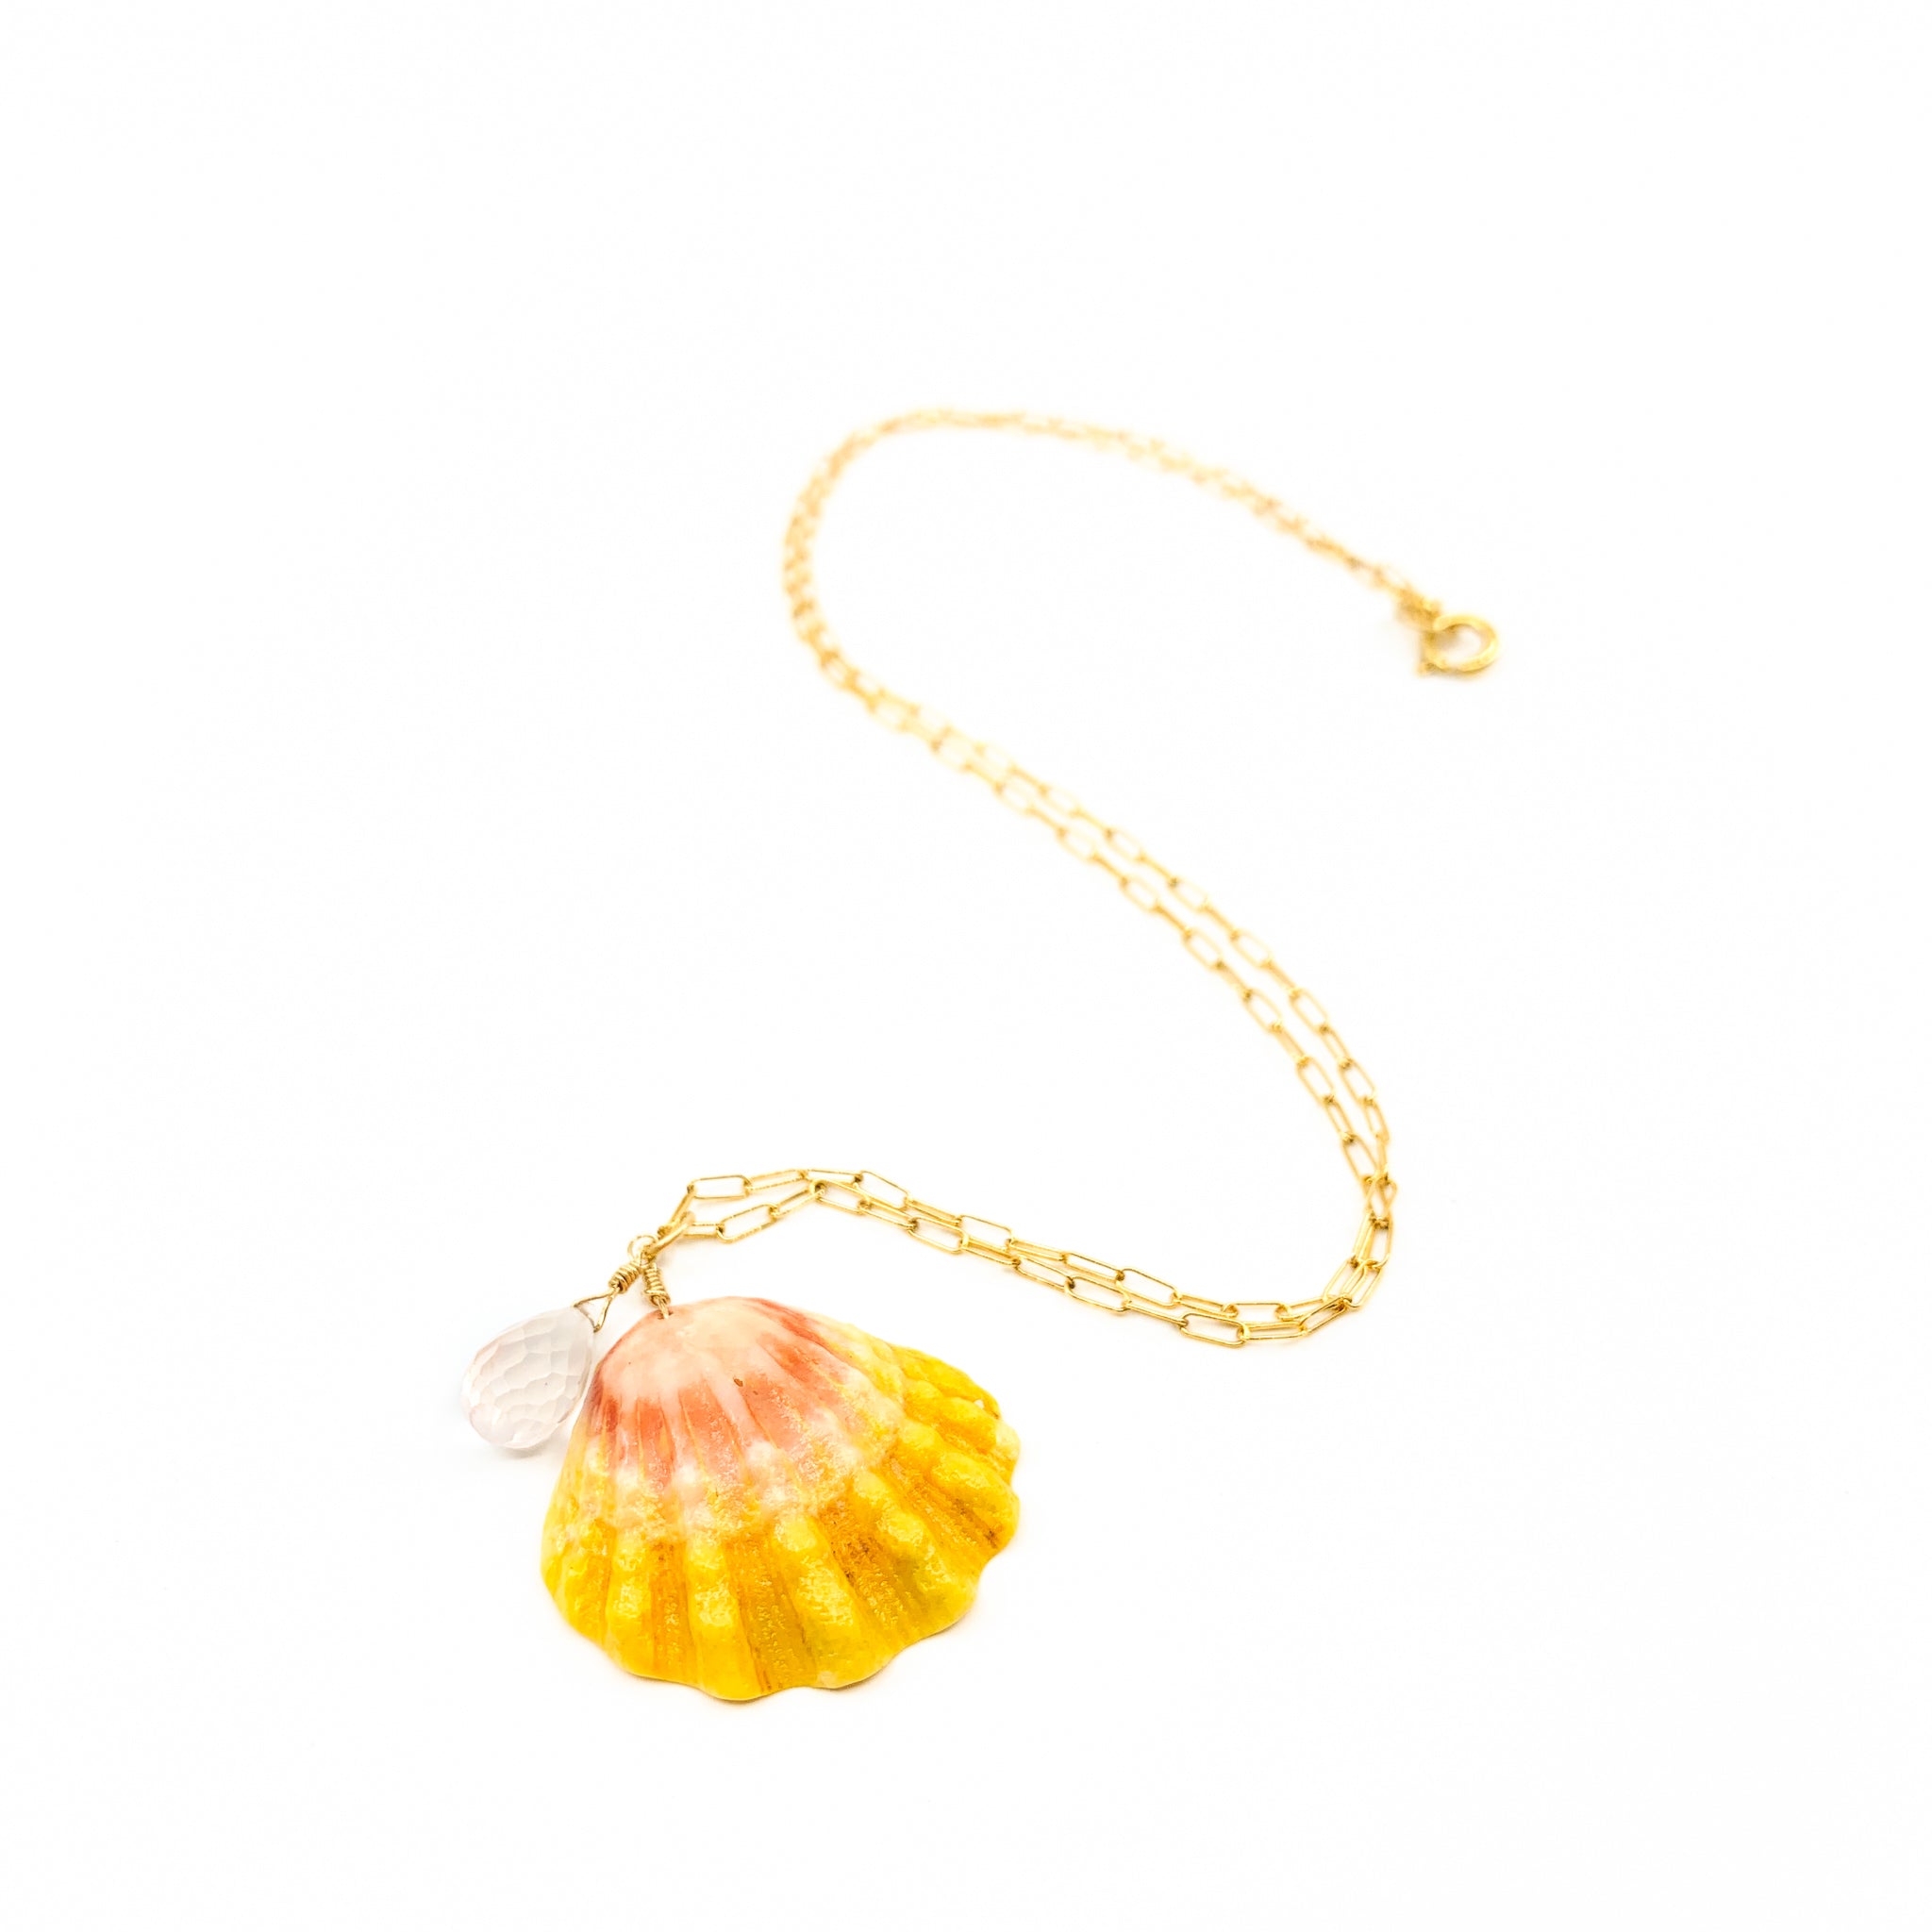 Hawaiian sunrise shell on simple gold chain necklace by eve black jewelry made in Hawaii